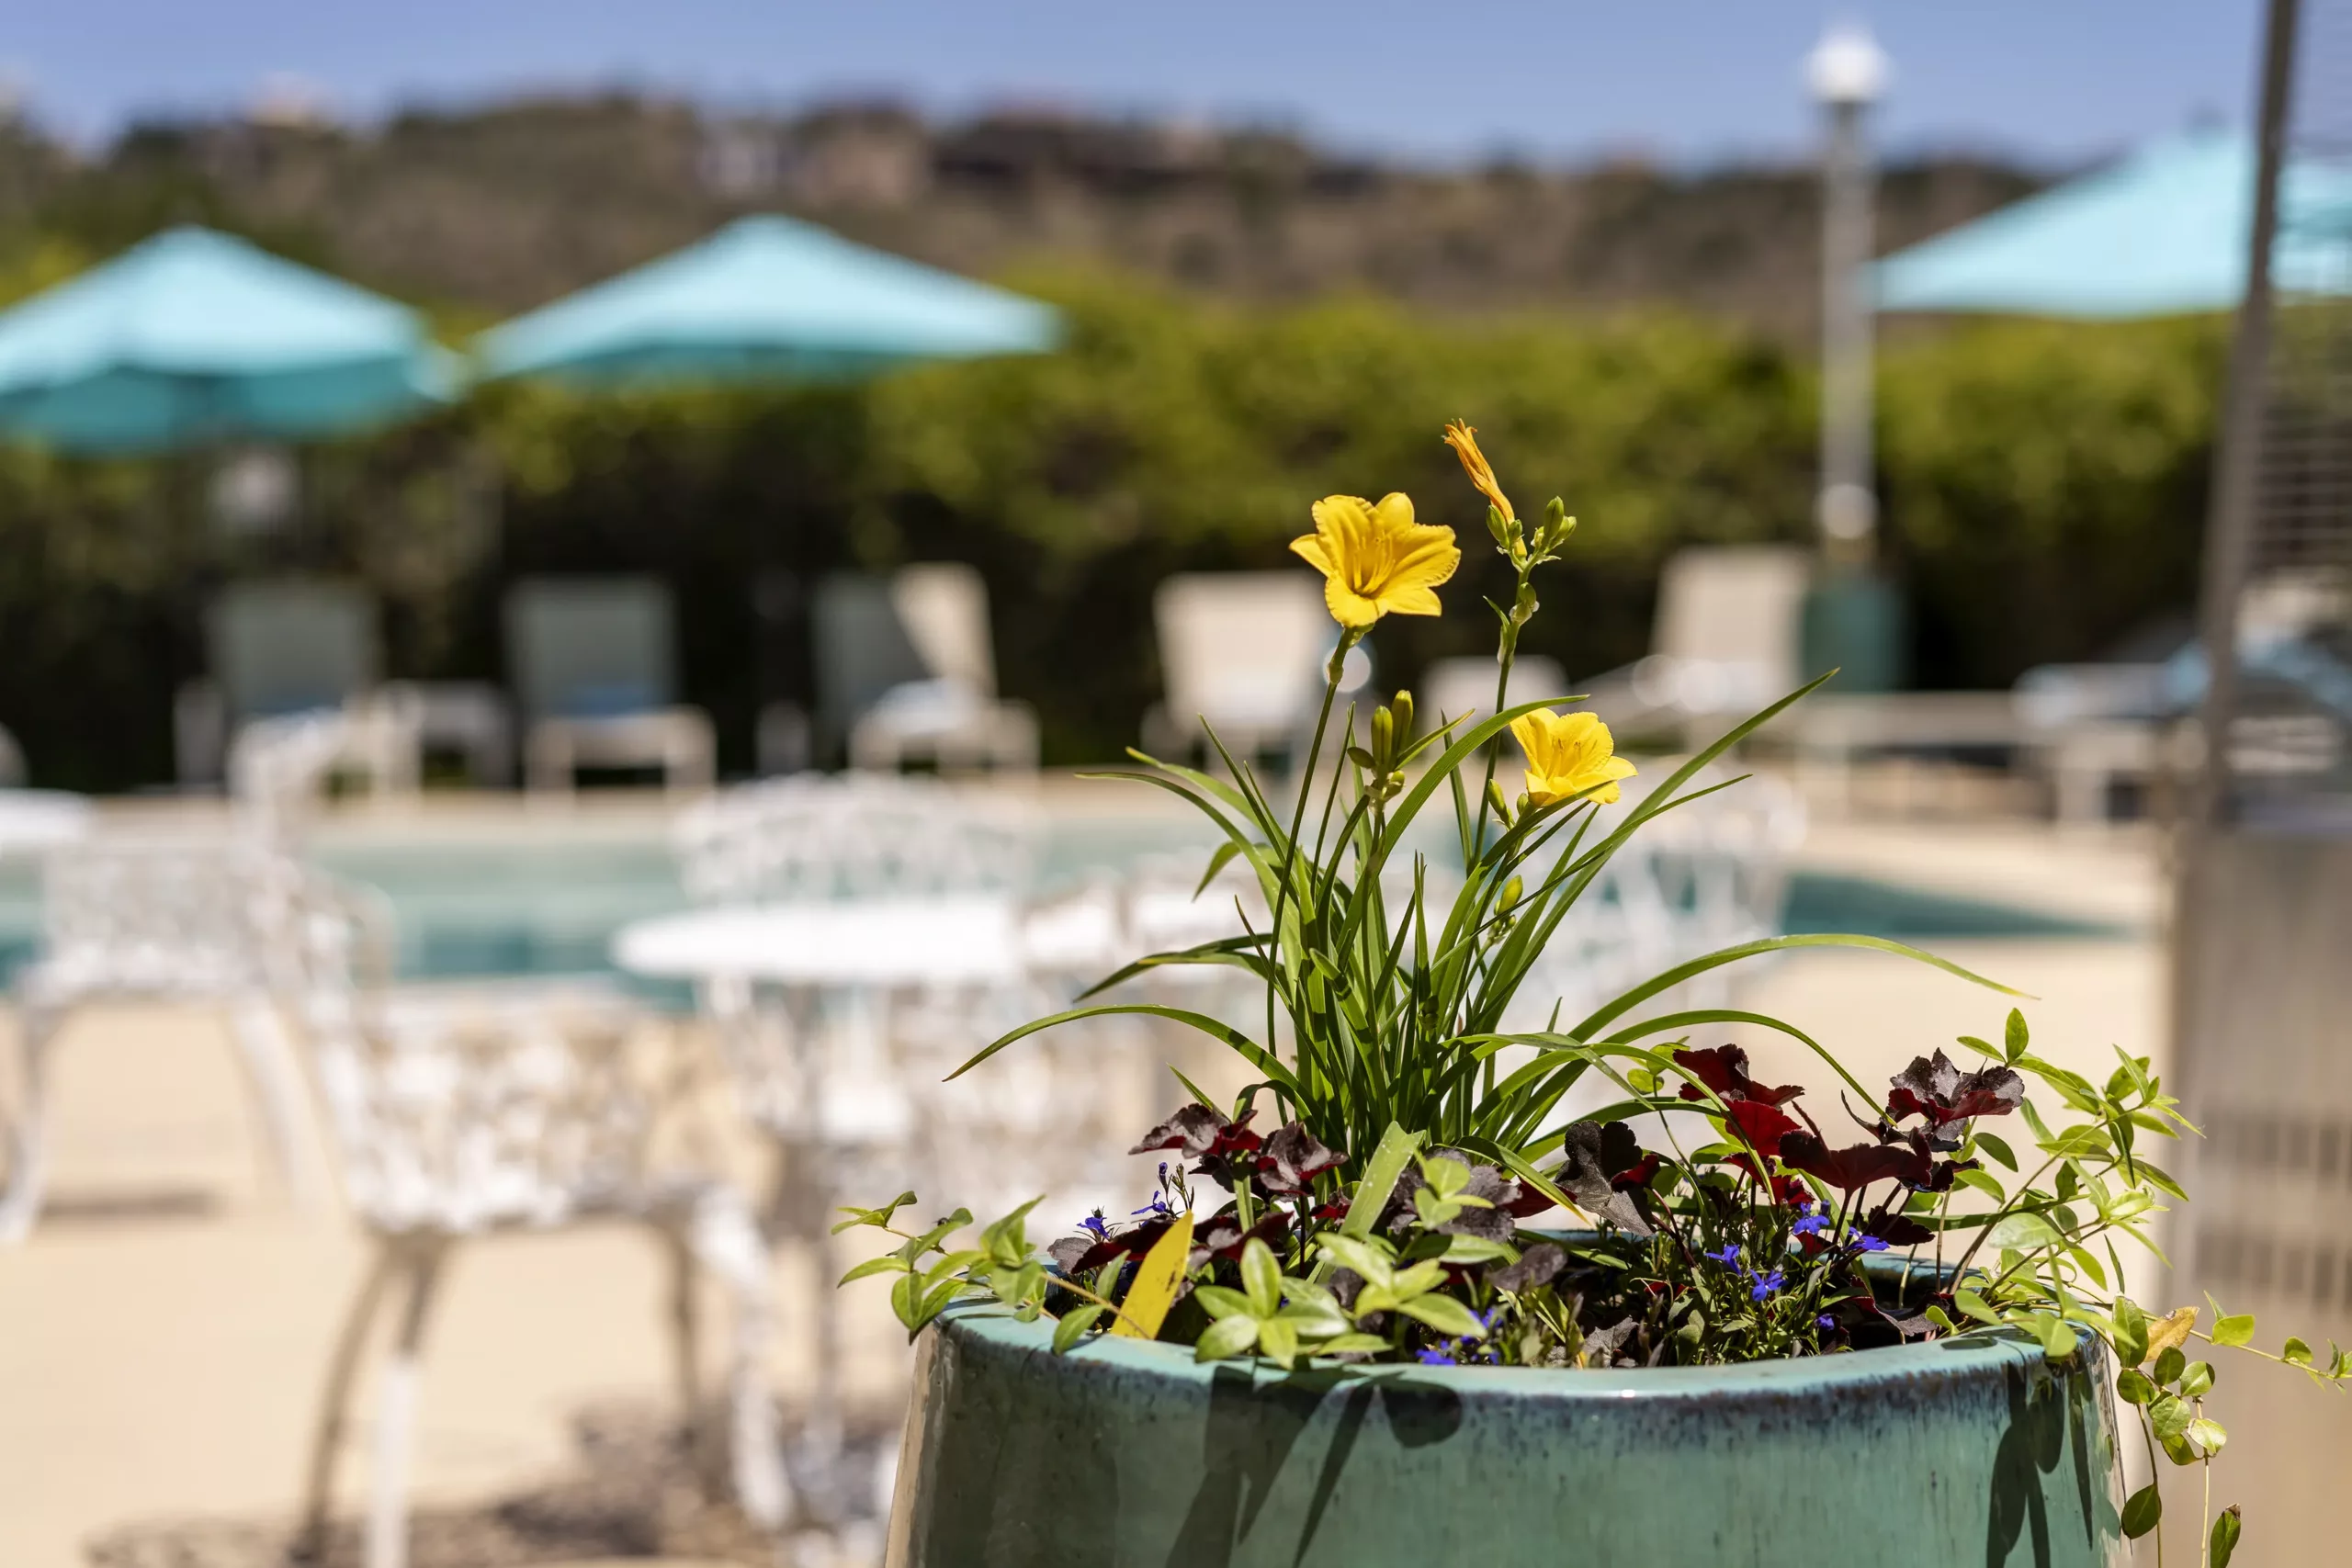 SW Herb Fest Event - Stay in May at Forest Villas Hotel Prescott